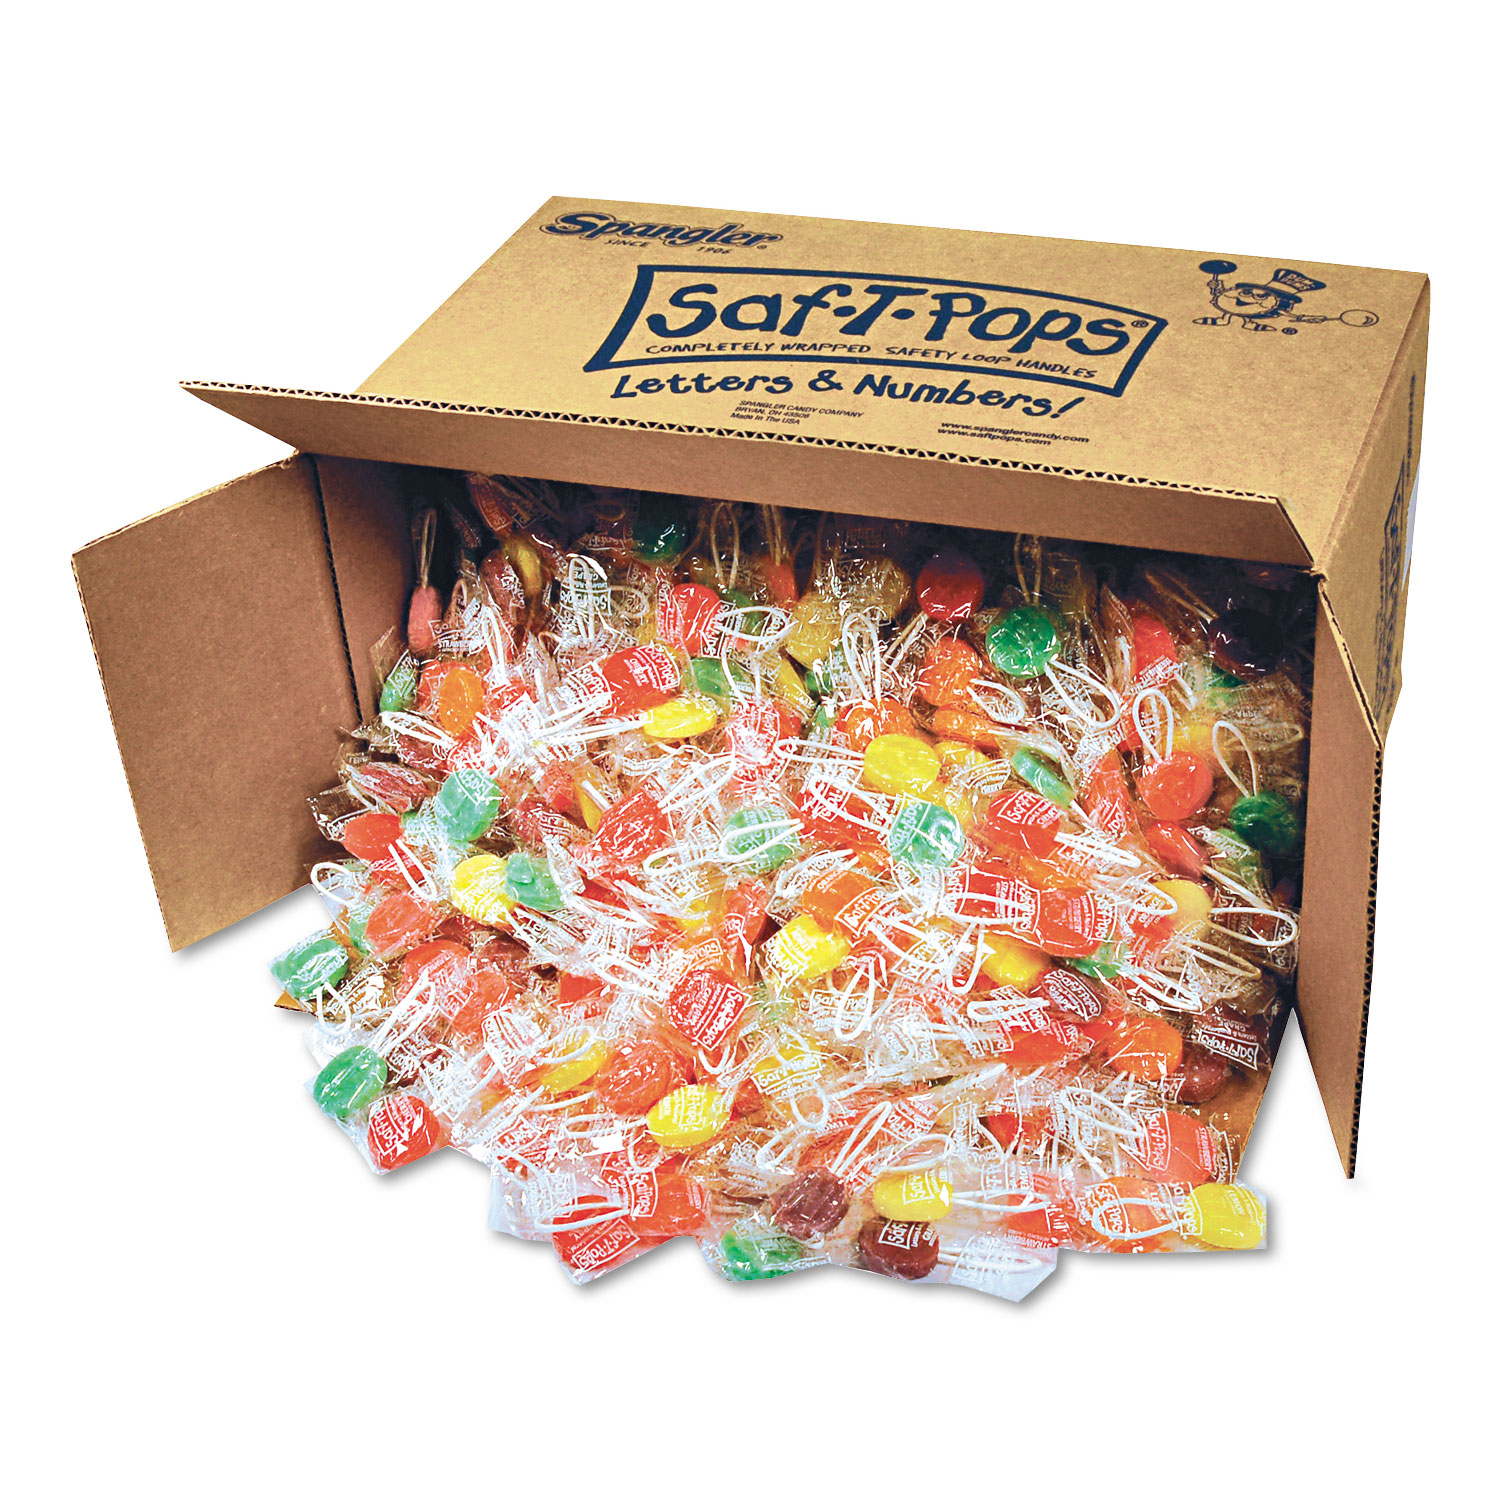 Saf-T-Pops, Assorted Flavors, Individually Wrapped, Bulk 25lb Box, 1000/Carton